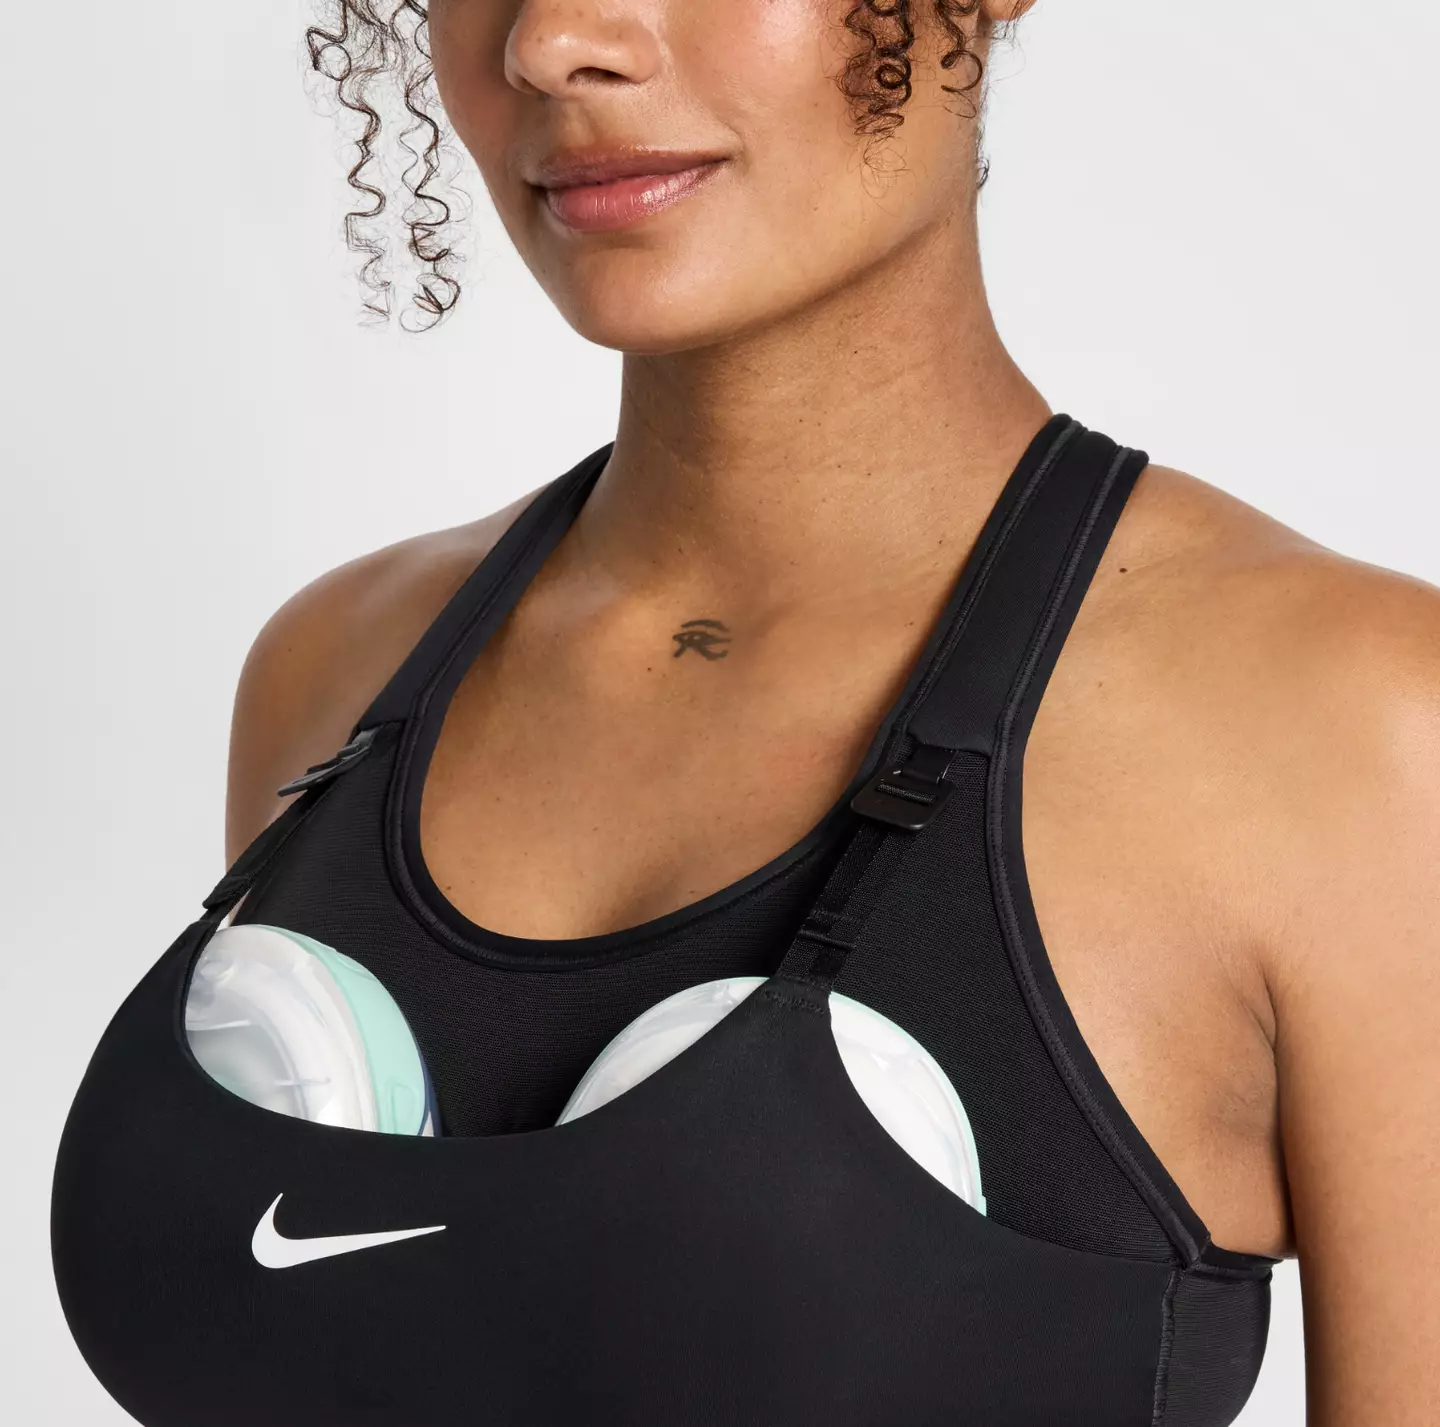 The bra also allows for wearing a breast pump and comes with the Nike Leak Protection.